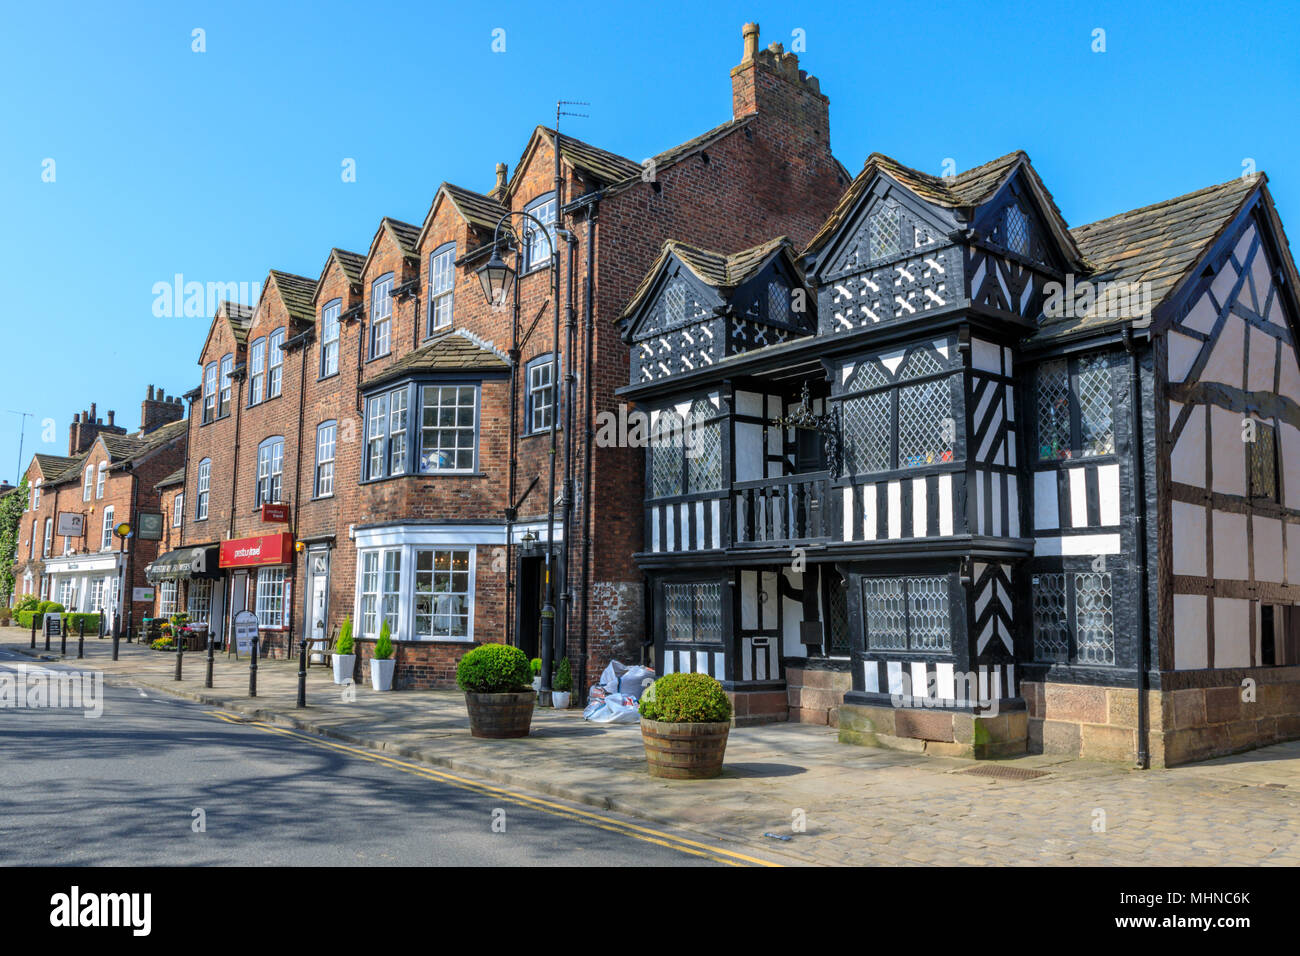 Old timber framed buildings in the main street of historic Prestbury a village in Cheshire England Stock Photo